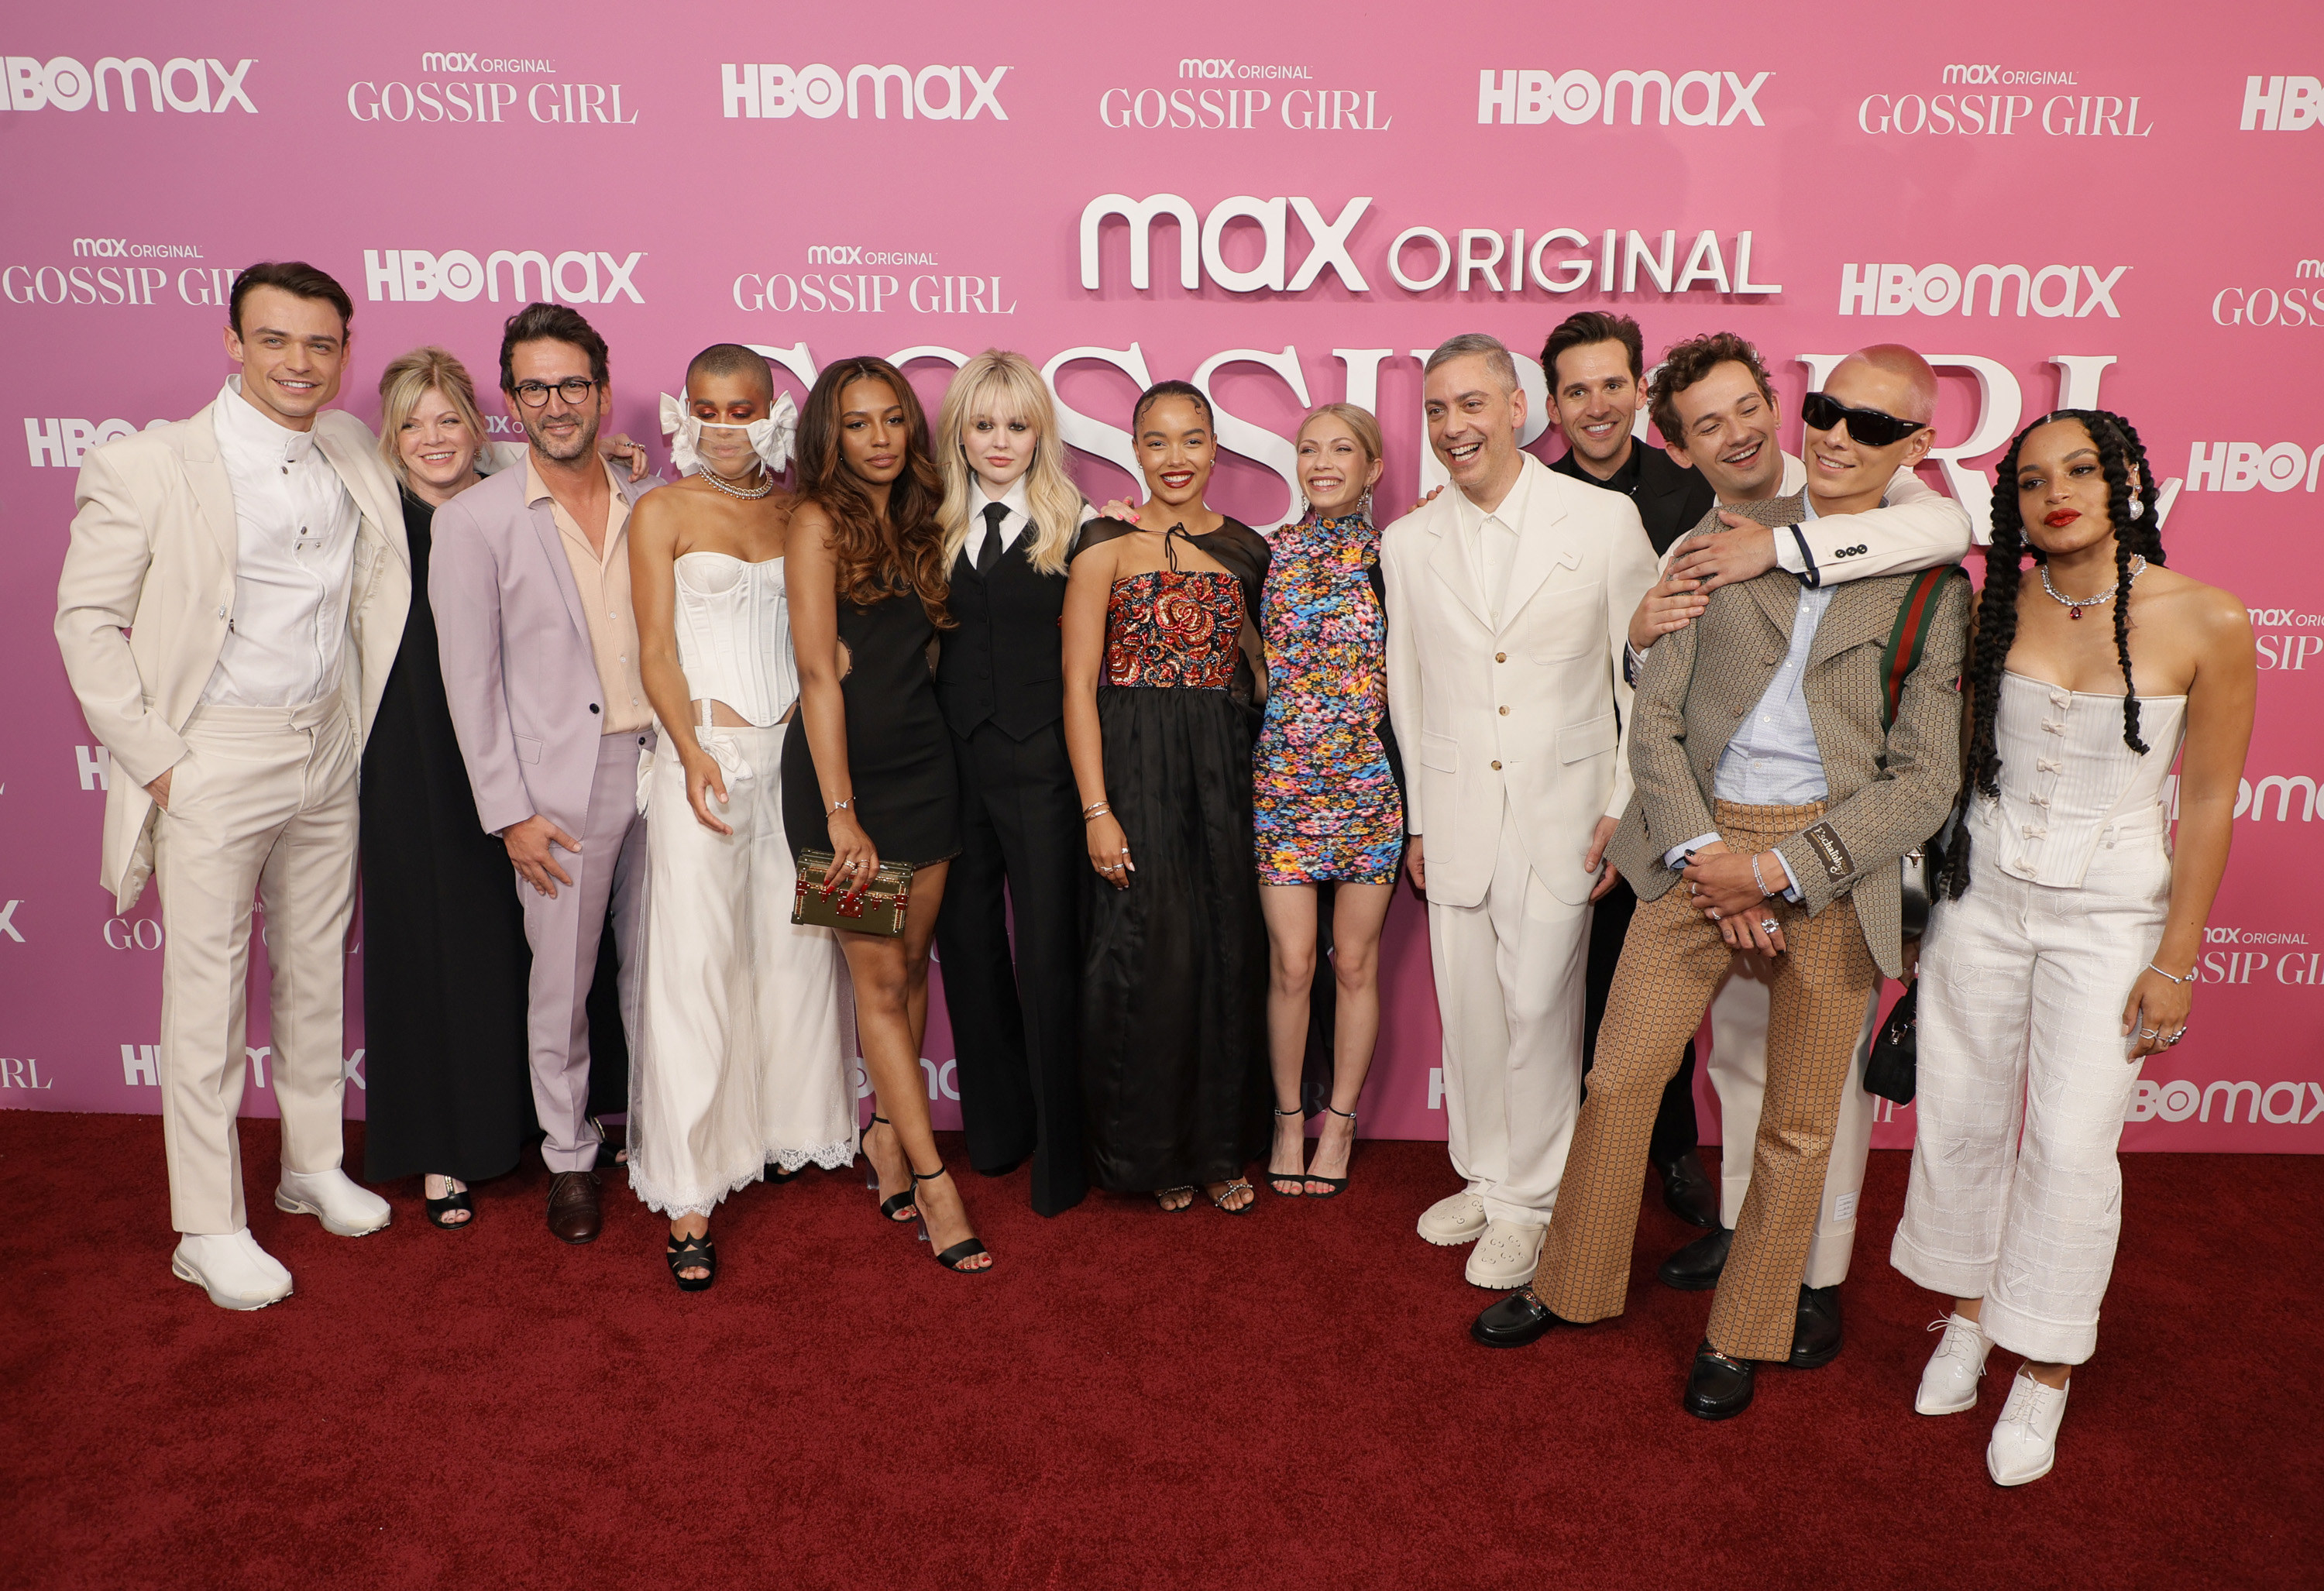 The cast of the Gossip Girl reboot on the red carpet